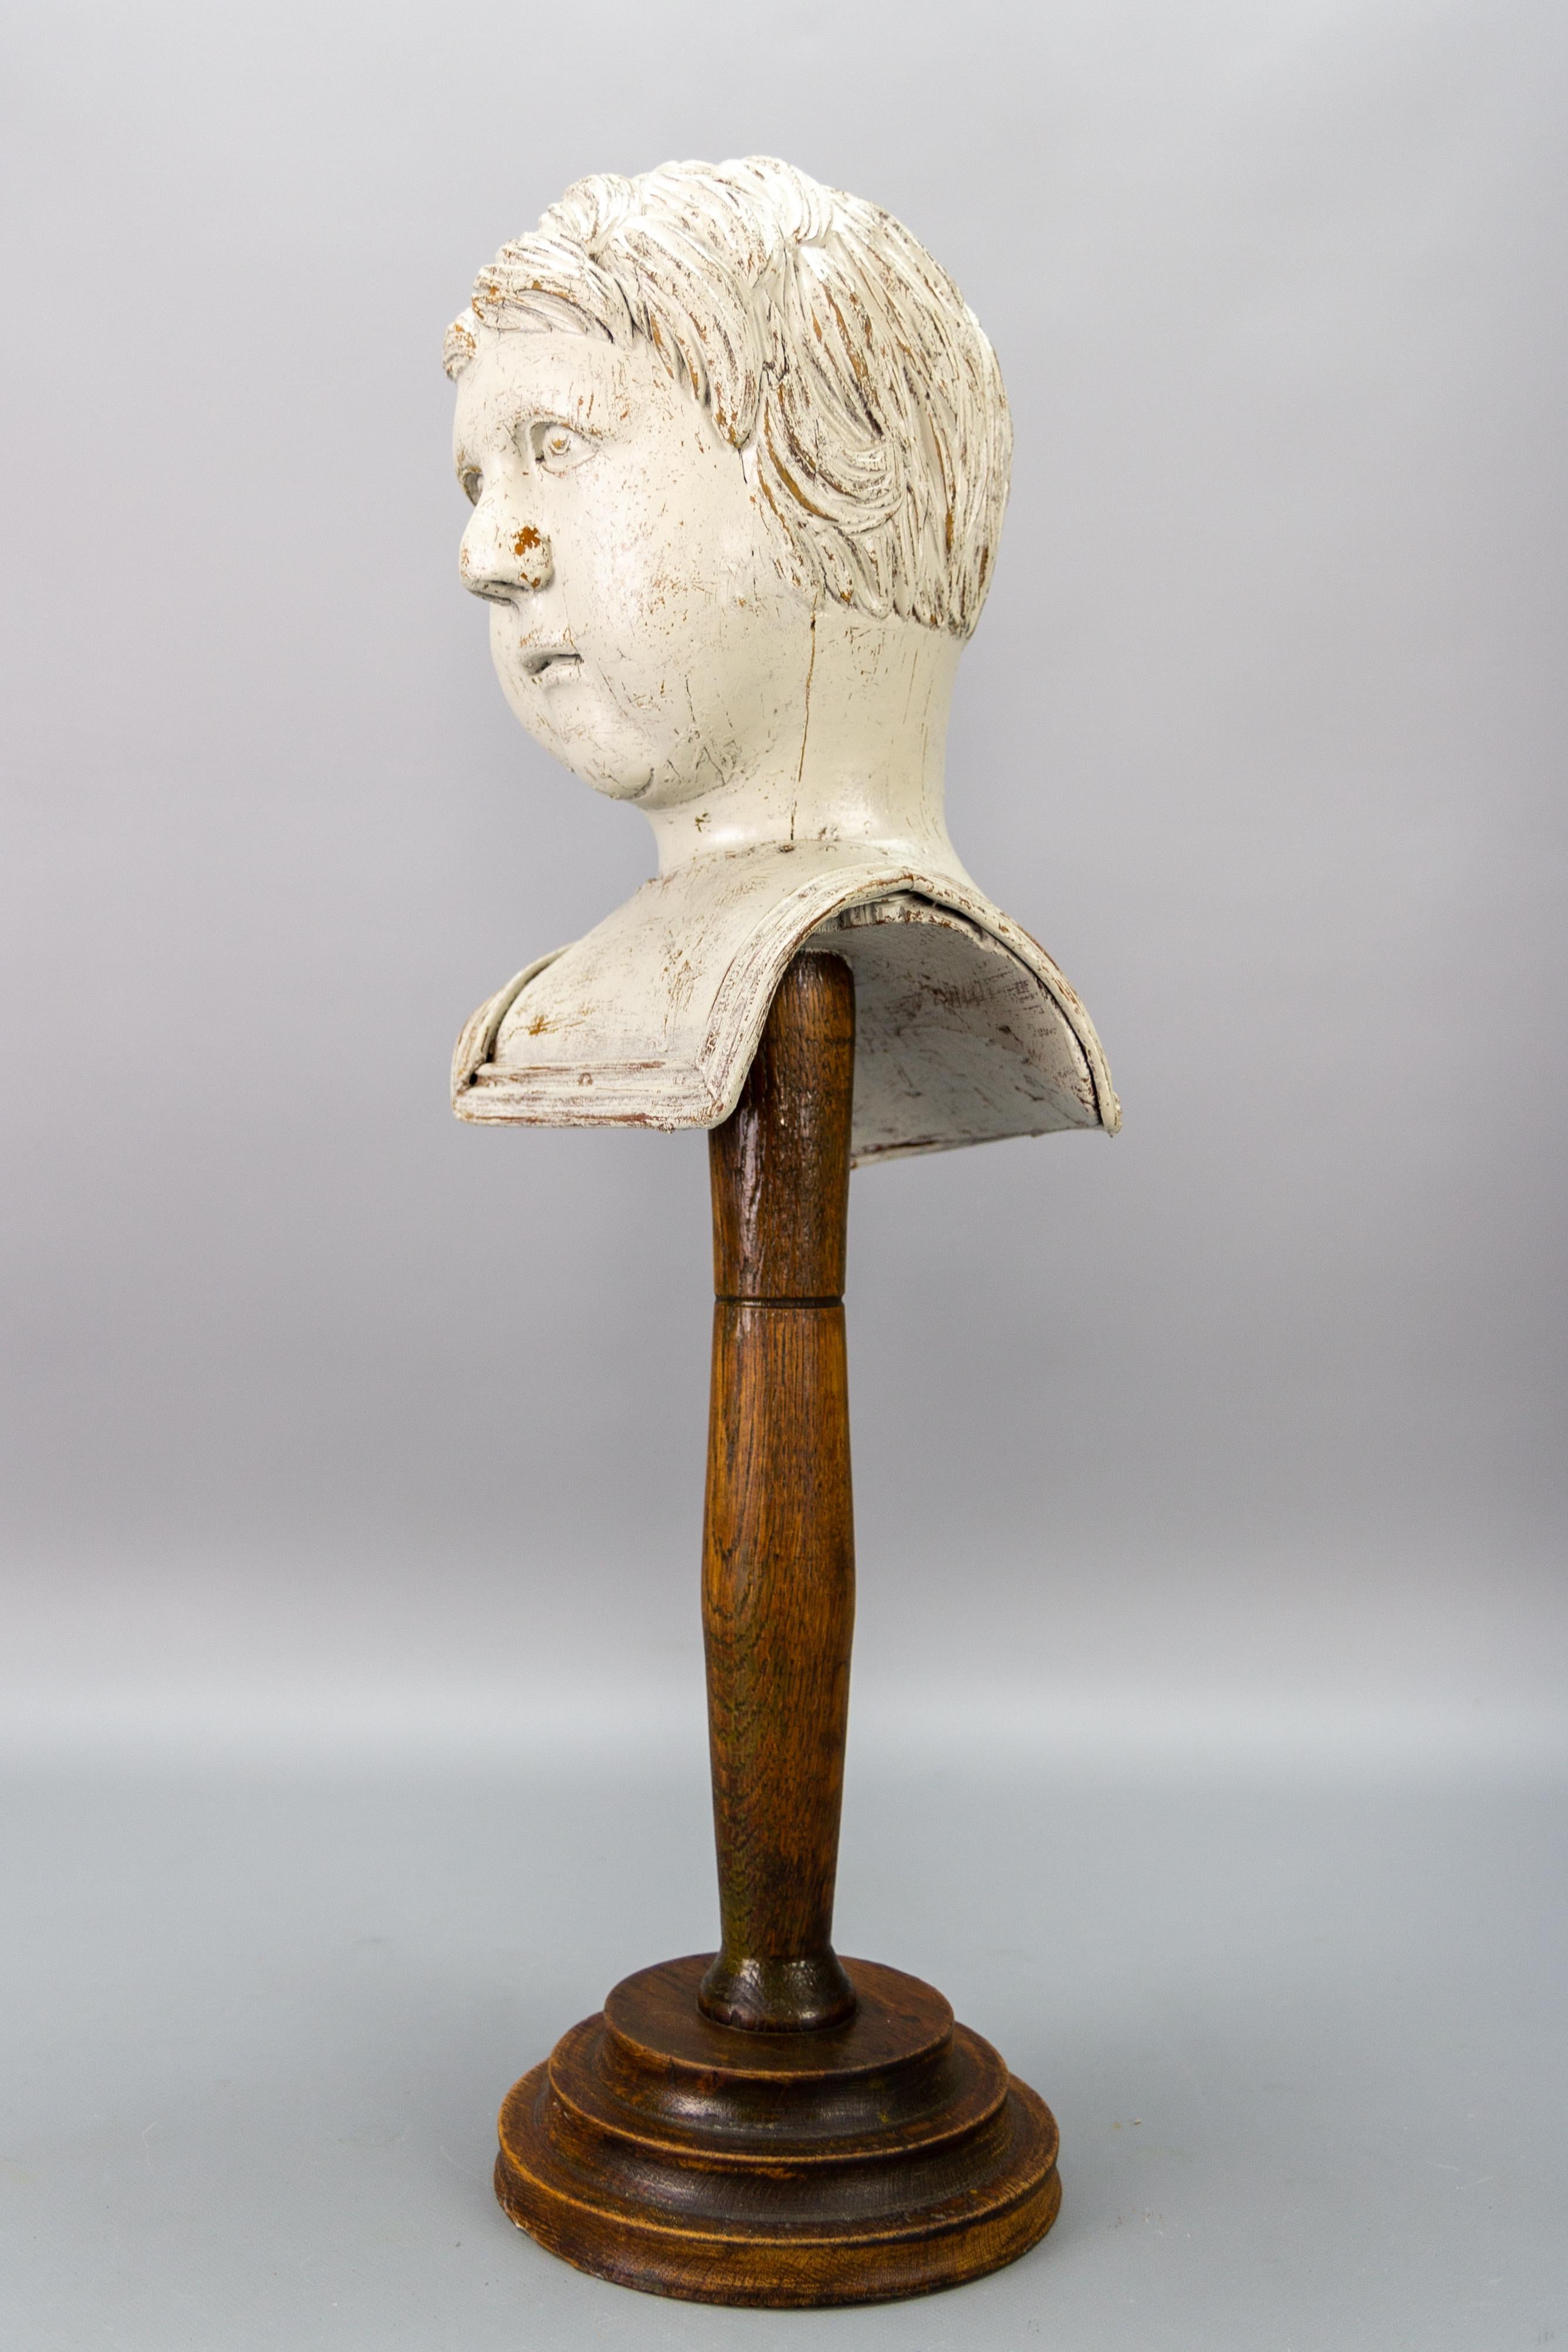 Baroque French Whitewashed Carved Wooden Sculpture Head or Bust on a Pedestal For Sale